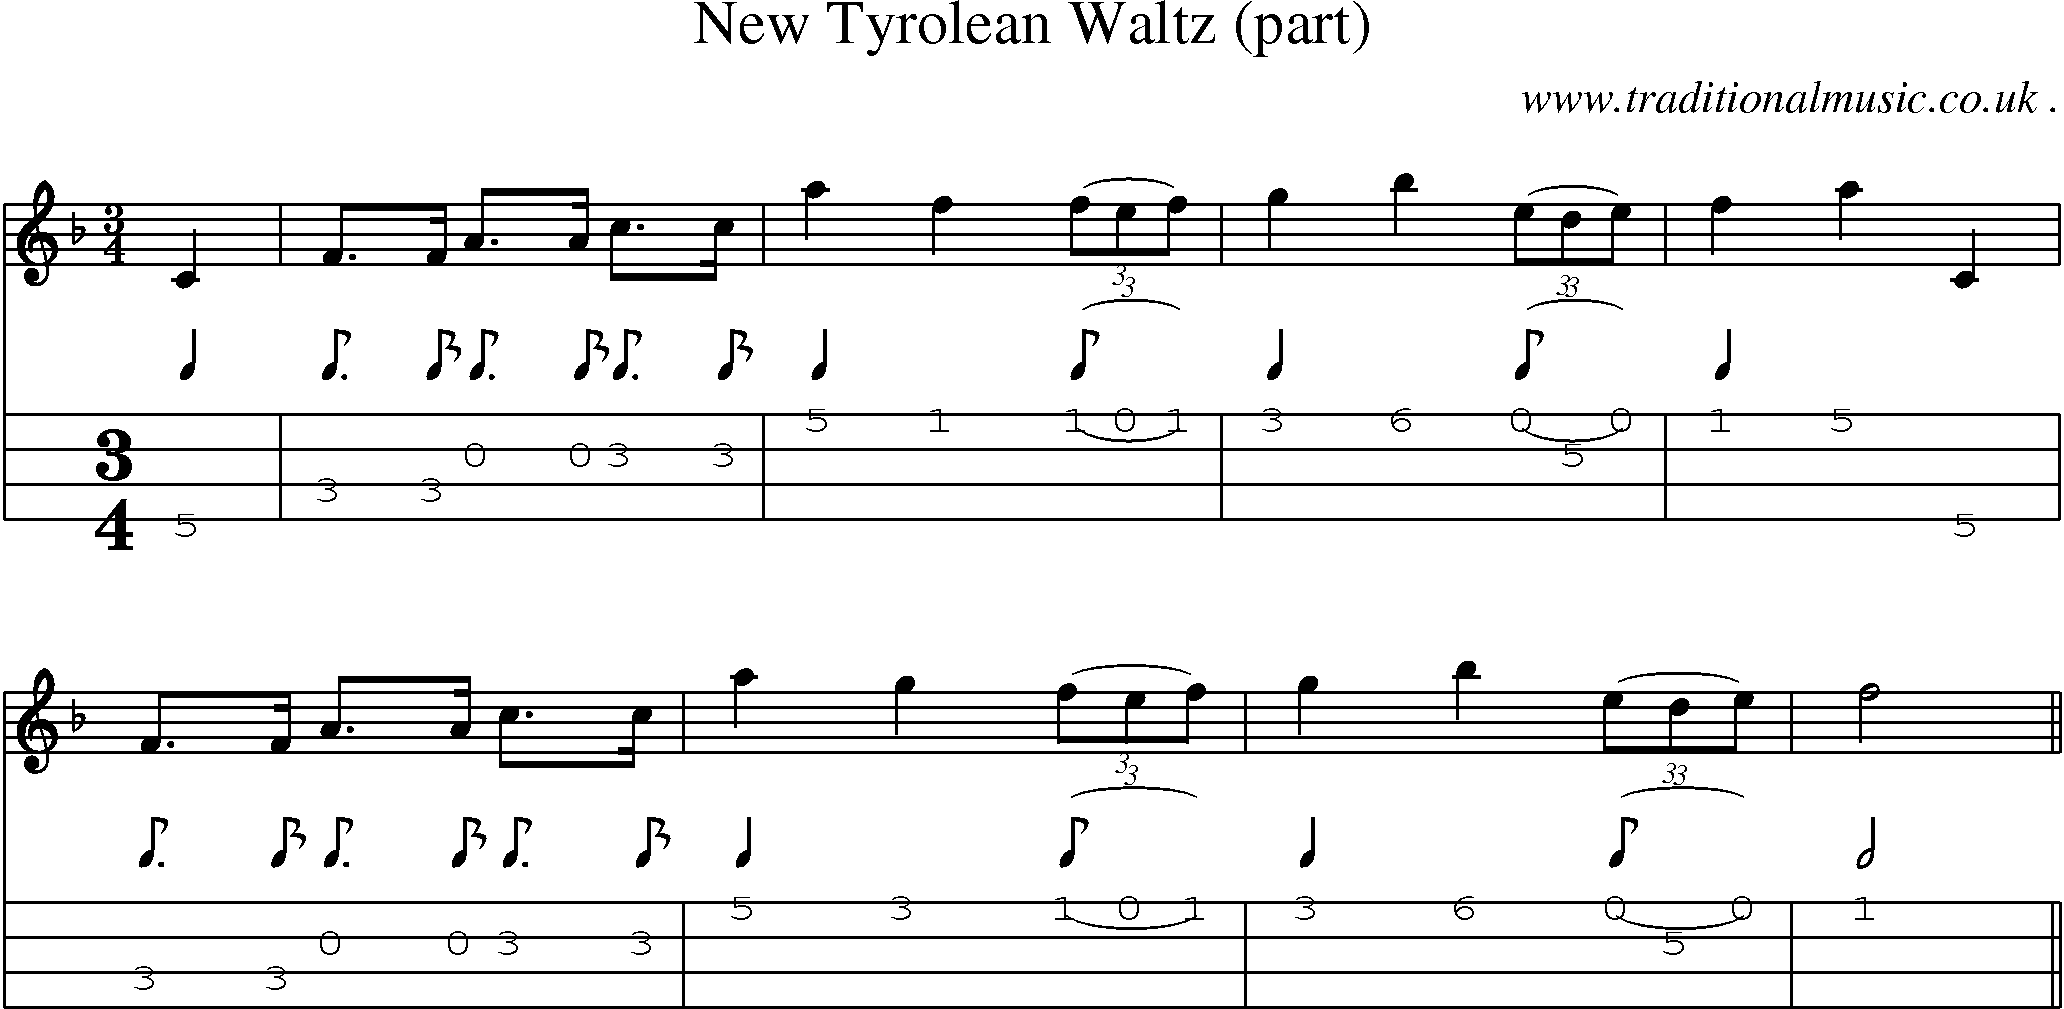 Sheet-Music and Mandolin Tabs for New Tyrolean Waltz (part)